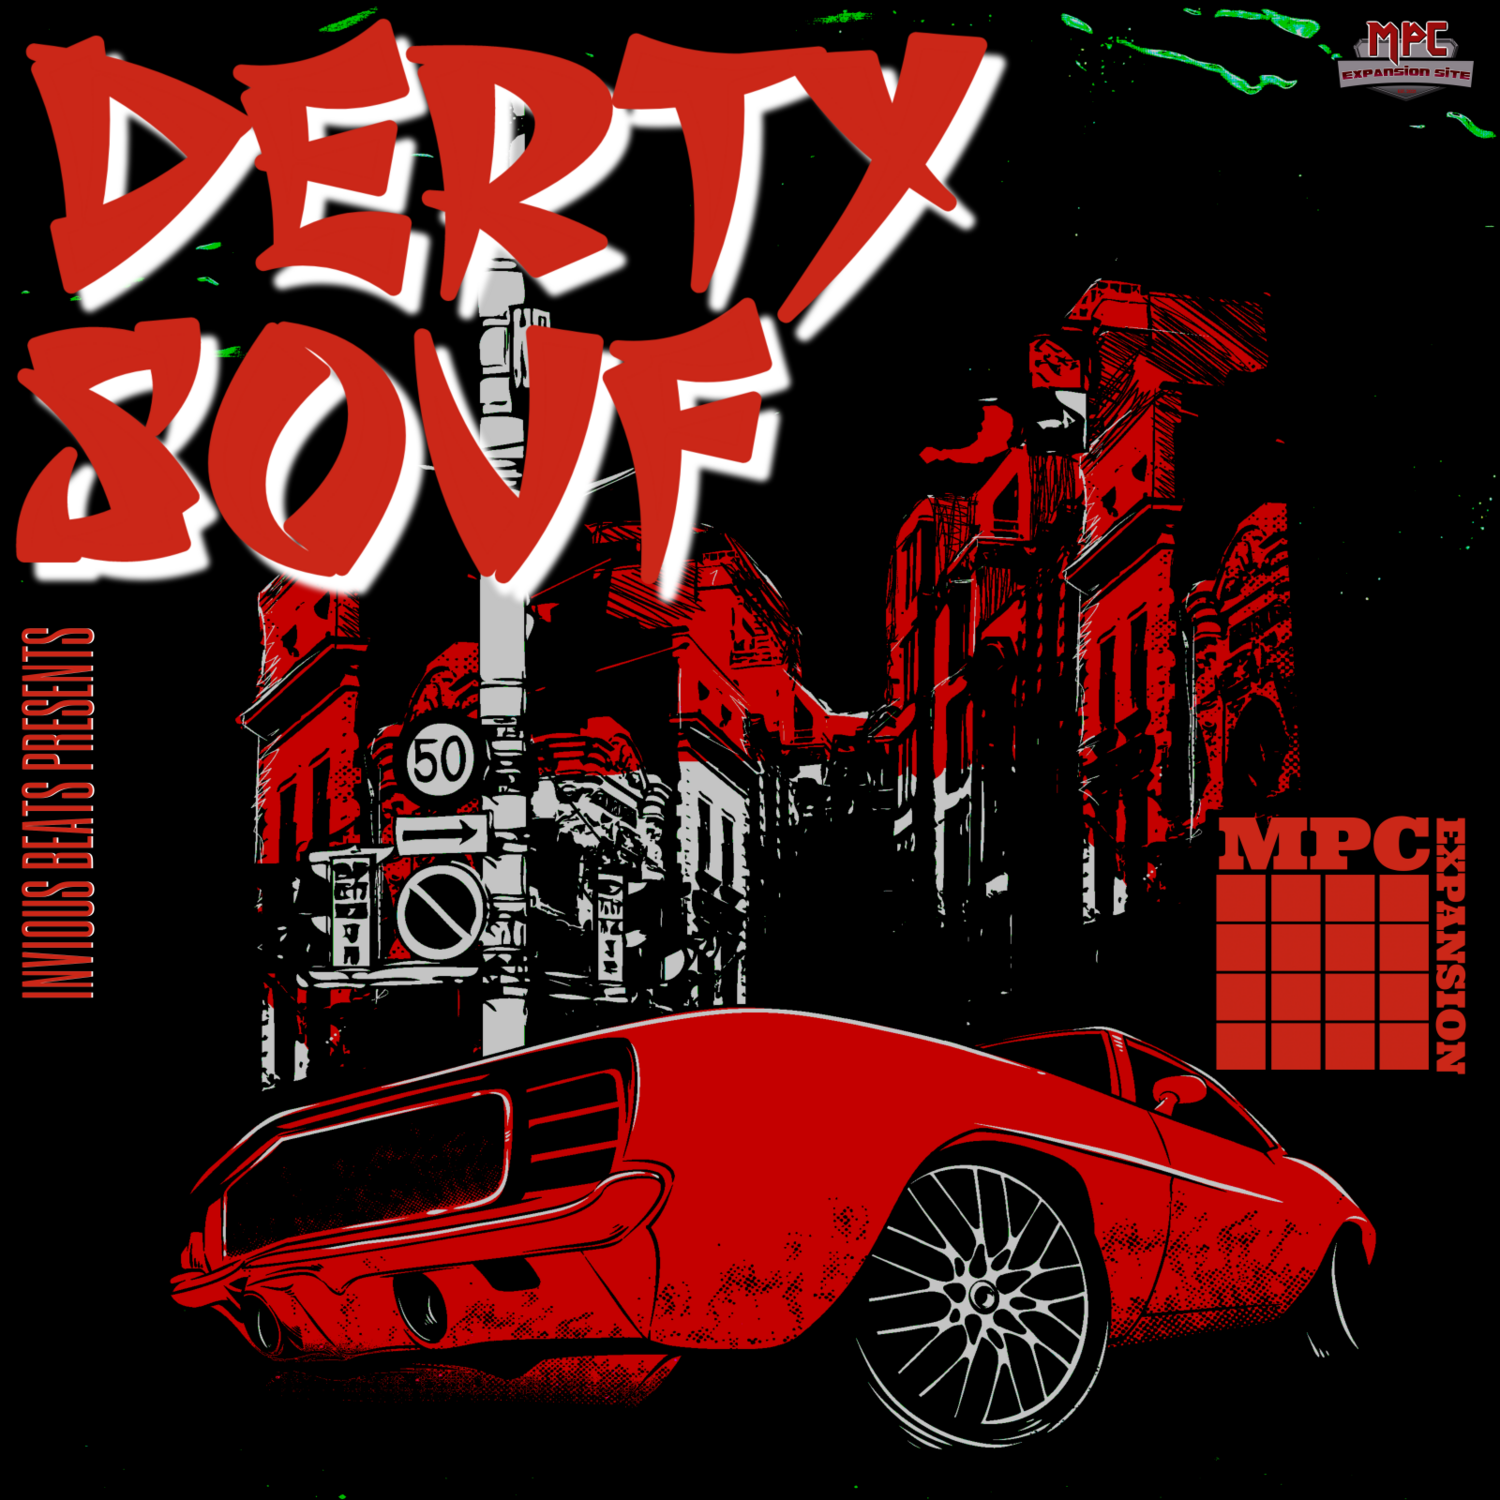 MPC EXPANSION 'DERTY SOUF' by INVIOUS